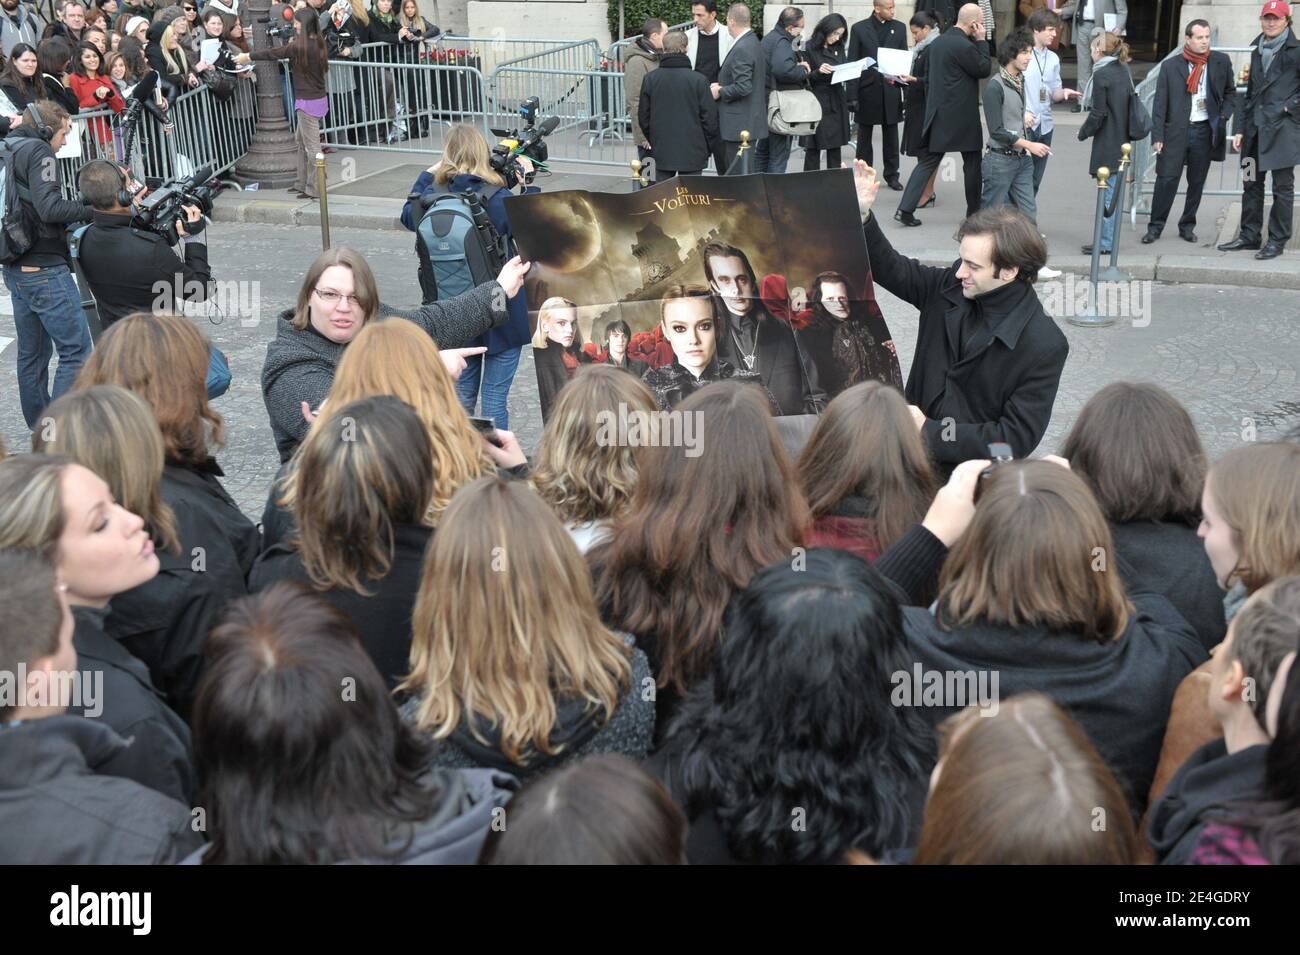 Director Chris Weitz and Actors Kristen Stewart, Taylor Lautner and Robert Pattinson wave to their fans after the photocall for the Chris Weitz's film 'The Twilight Saga: New Moon' at Hotel Crillon on November 10, 2009. Photo by Jeremy Charriau/ABACAPRESS.COM Stock Photo